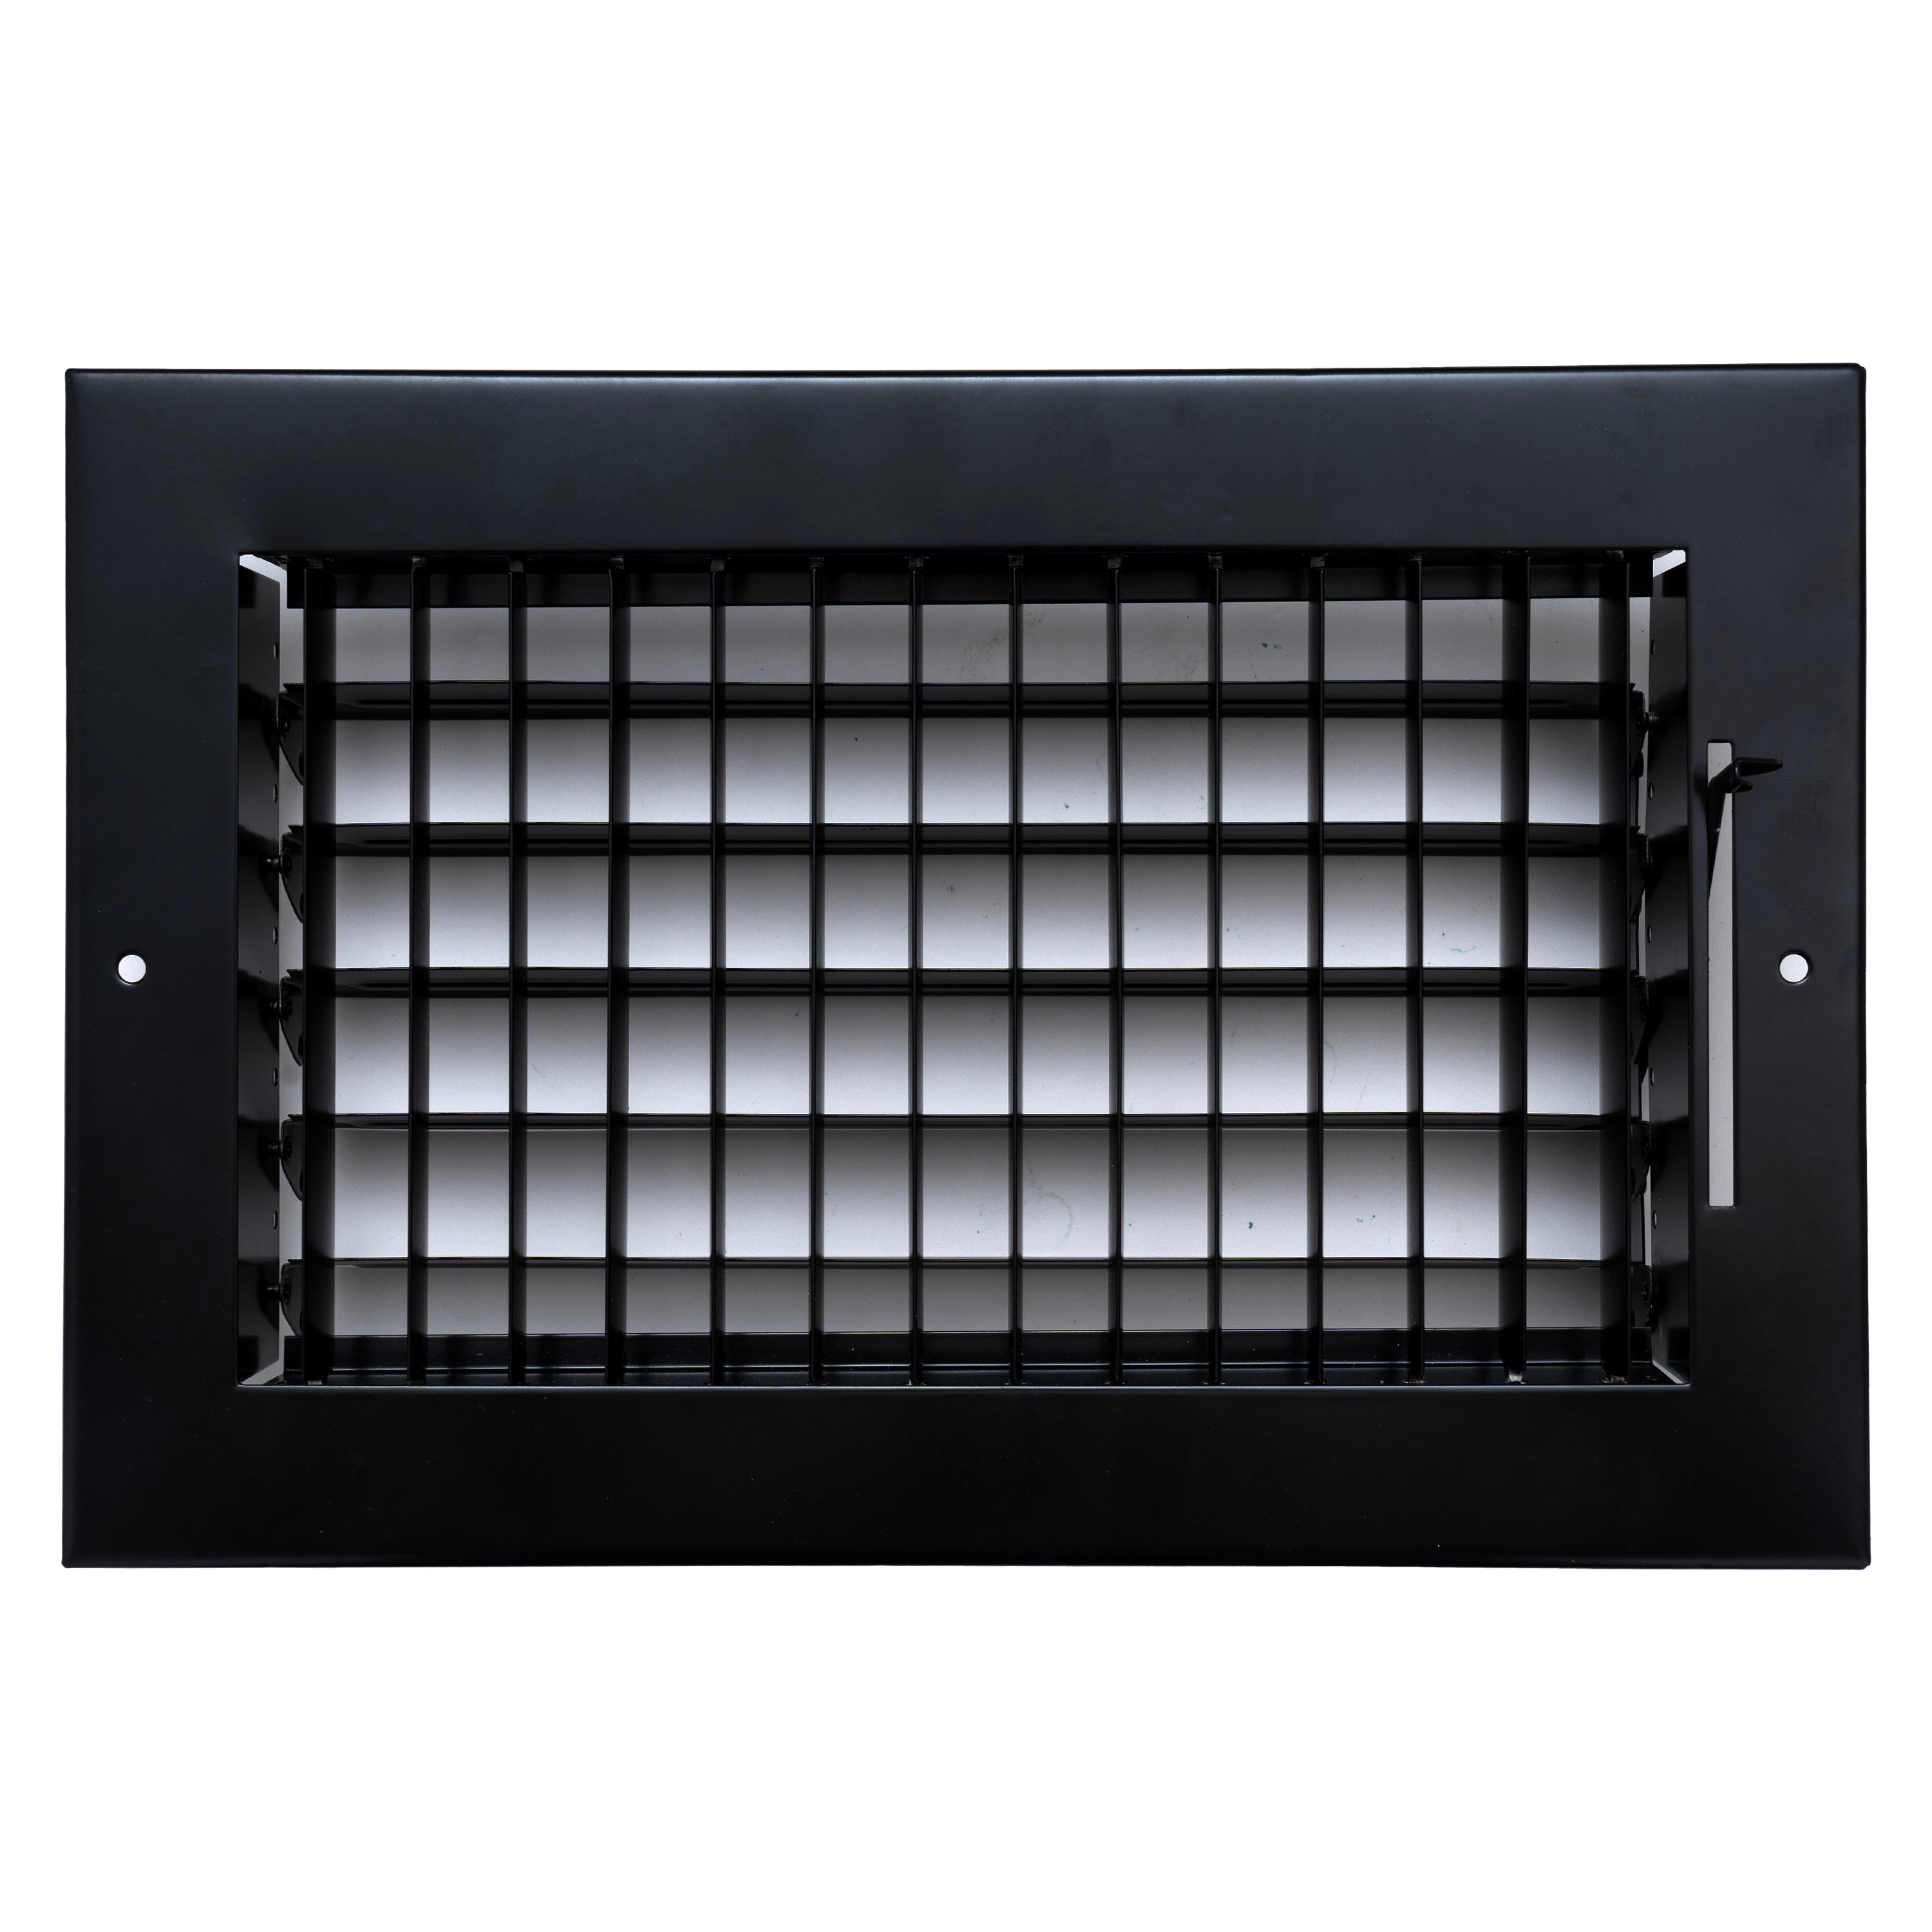 airgrilles 10x6 steel adjustable air supply grille register vent cover grill for sidewall and ceiling Black  Outer Dimensions: 11.75"W X 7.75"H for 10x6 Duct Opening